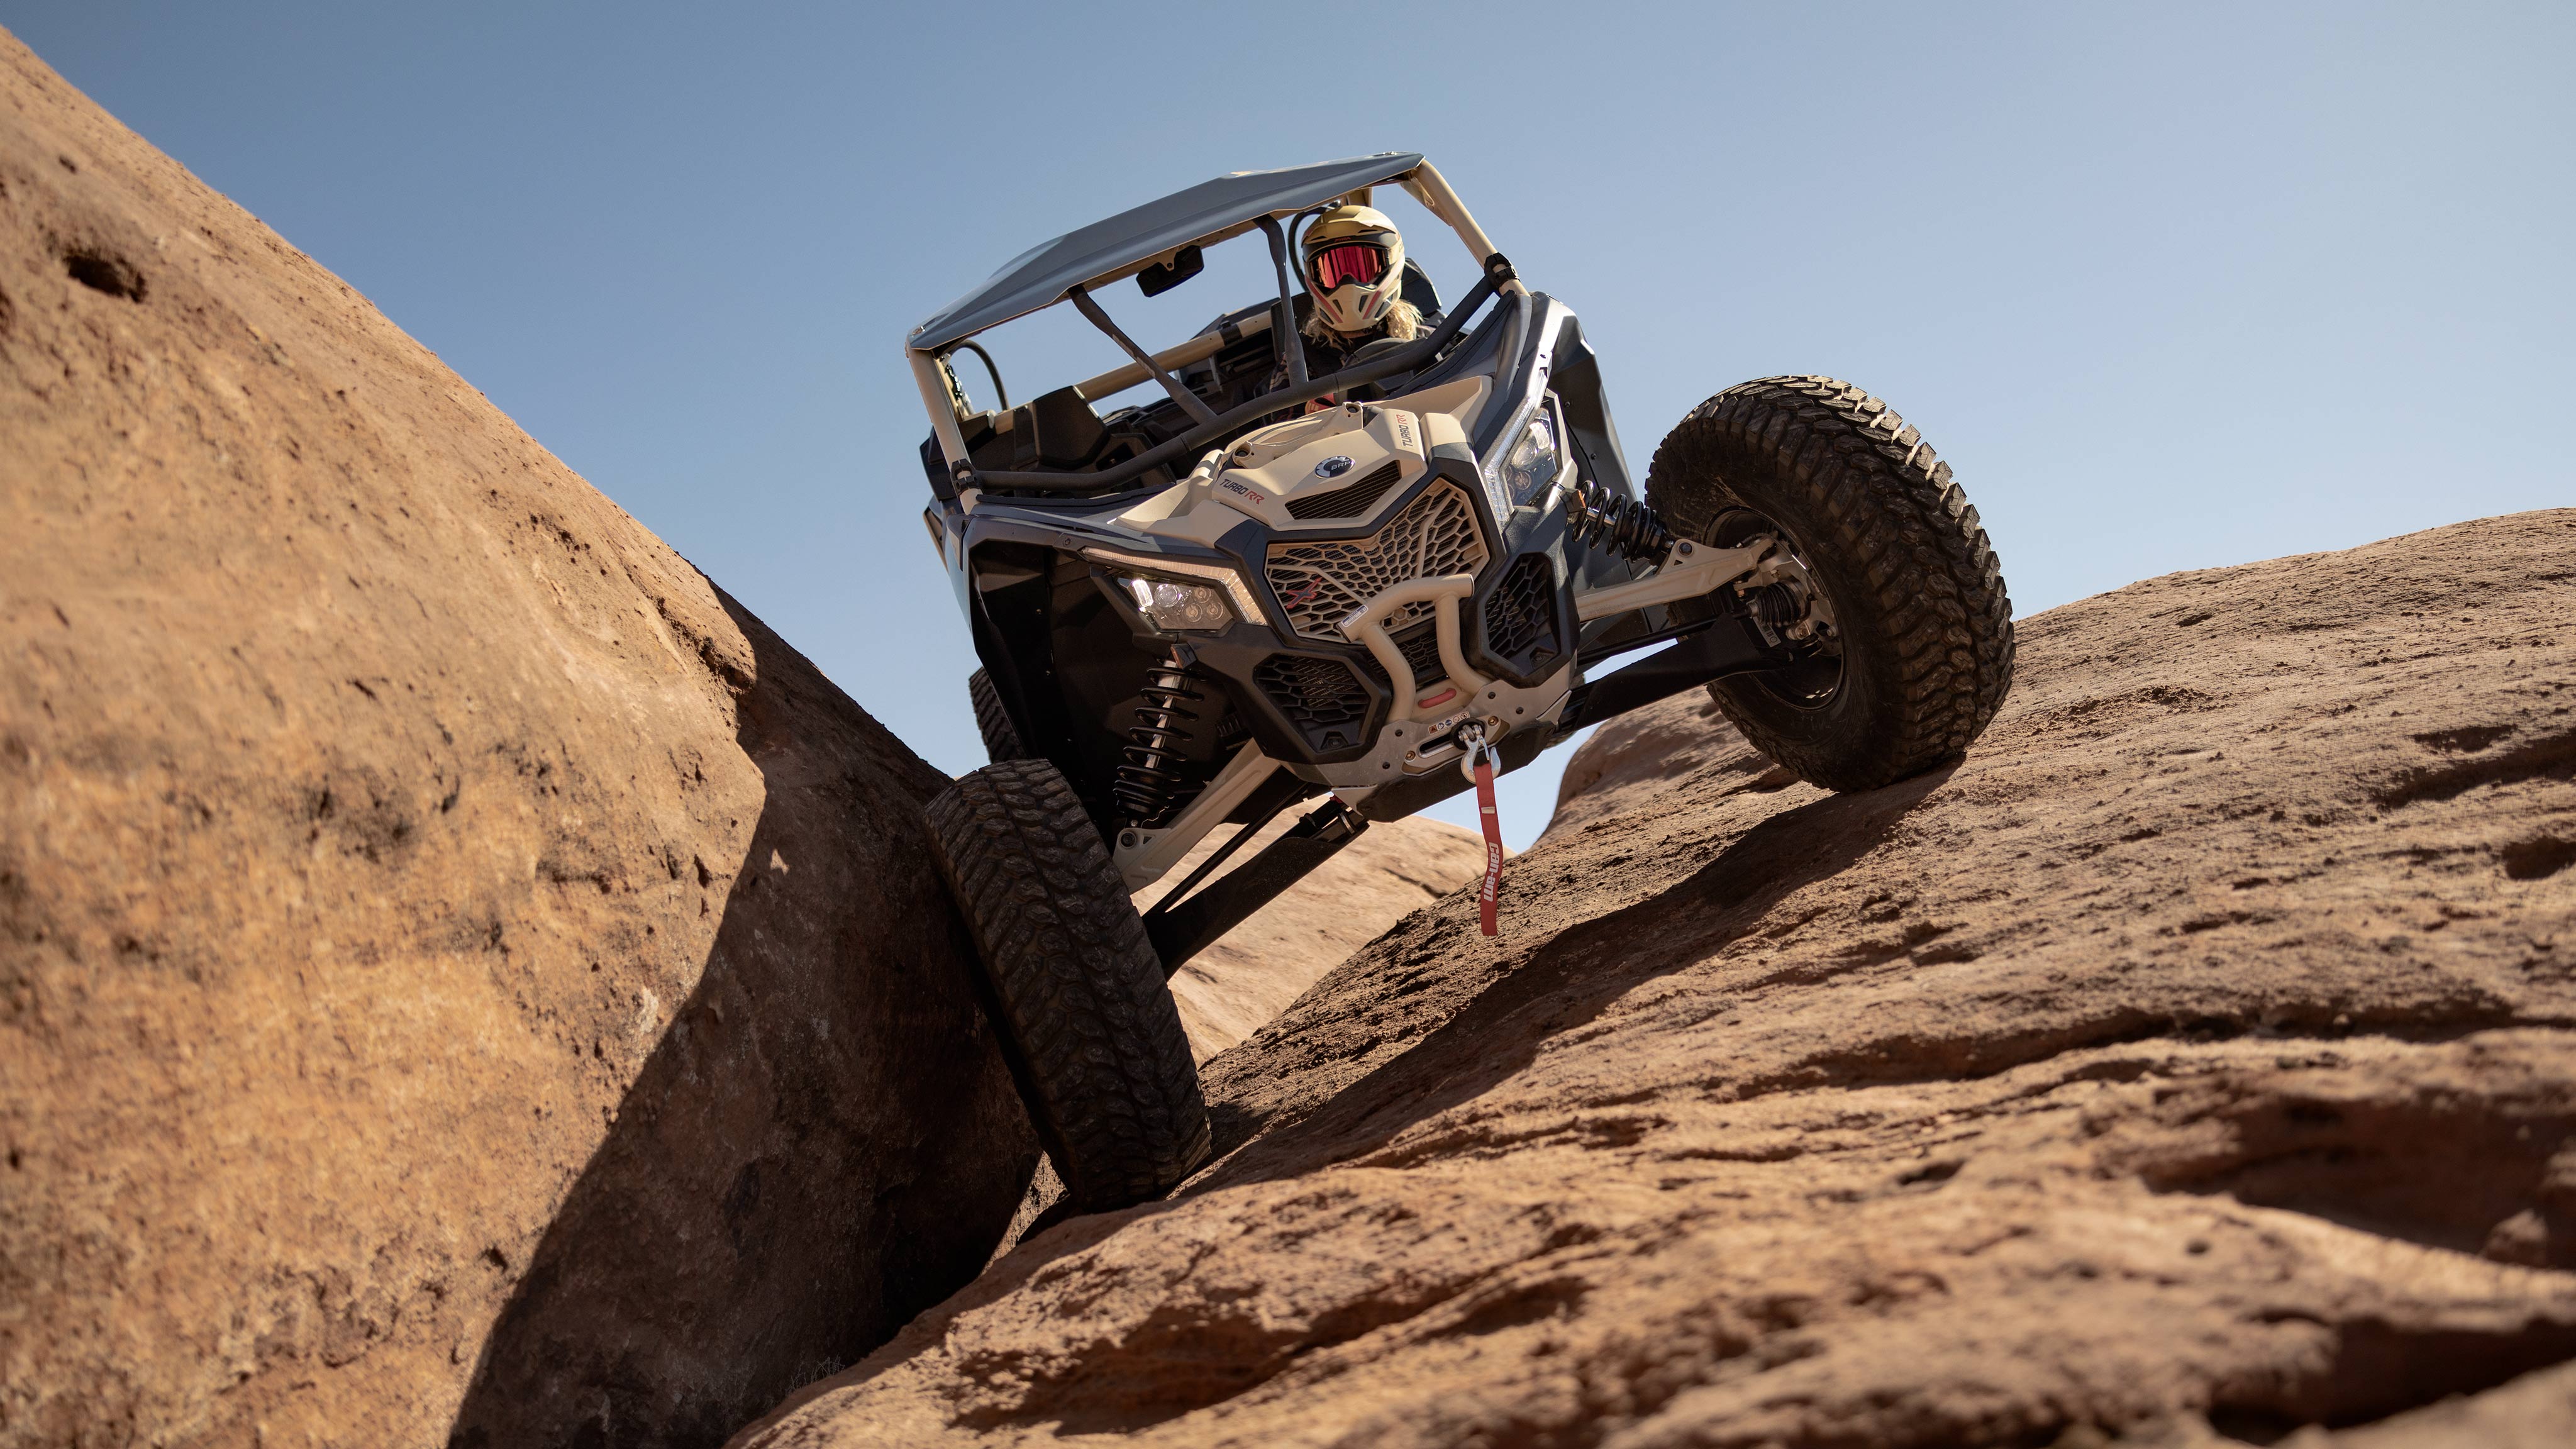 A Mineral Grey and Desert Tan Can-Am Maverick X3 RC 72 Turbo RR on a rock climbing expedition